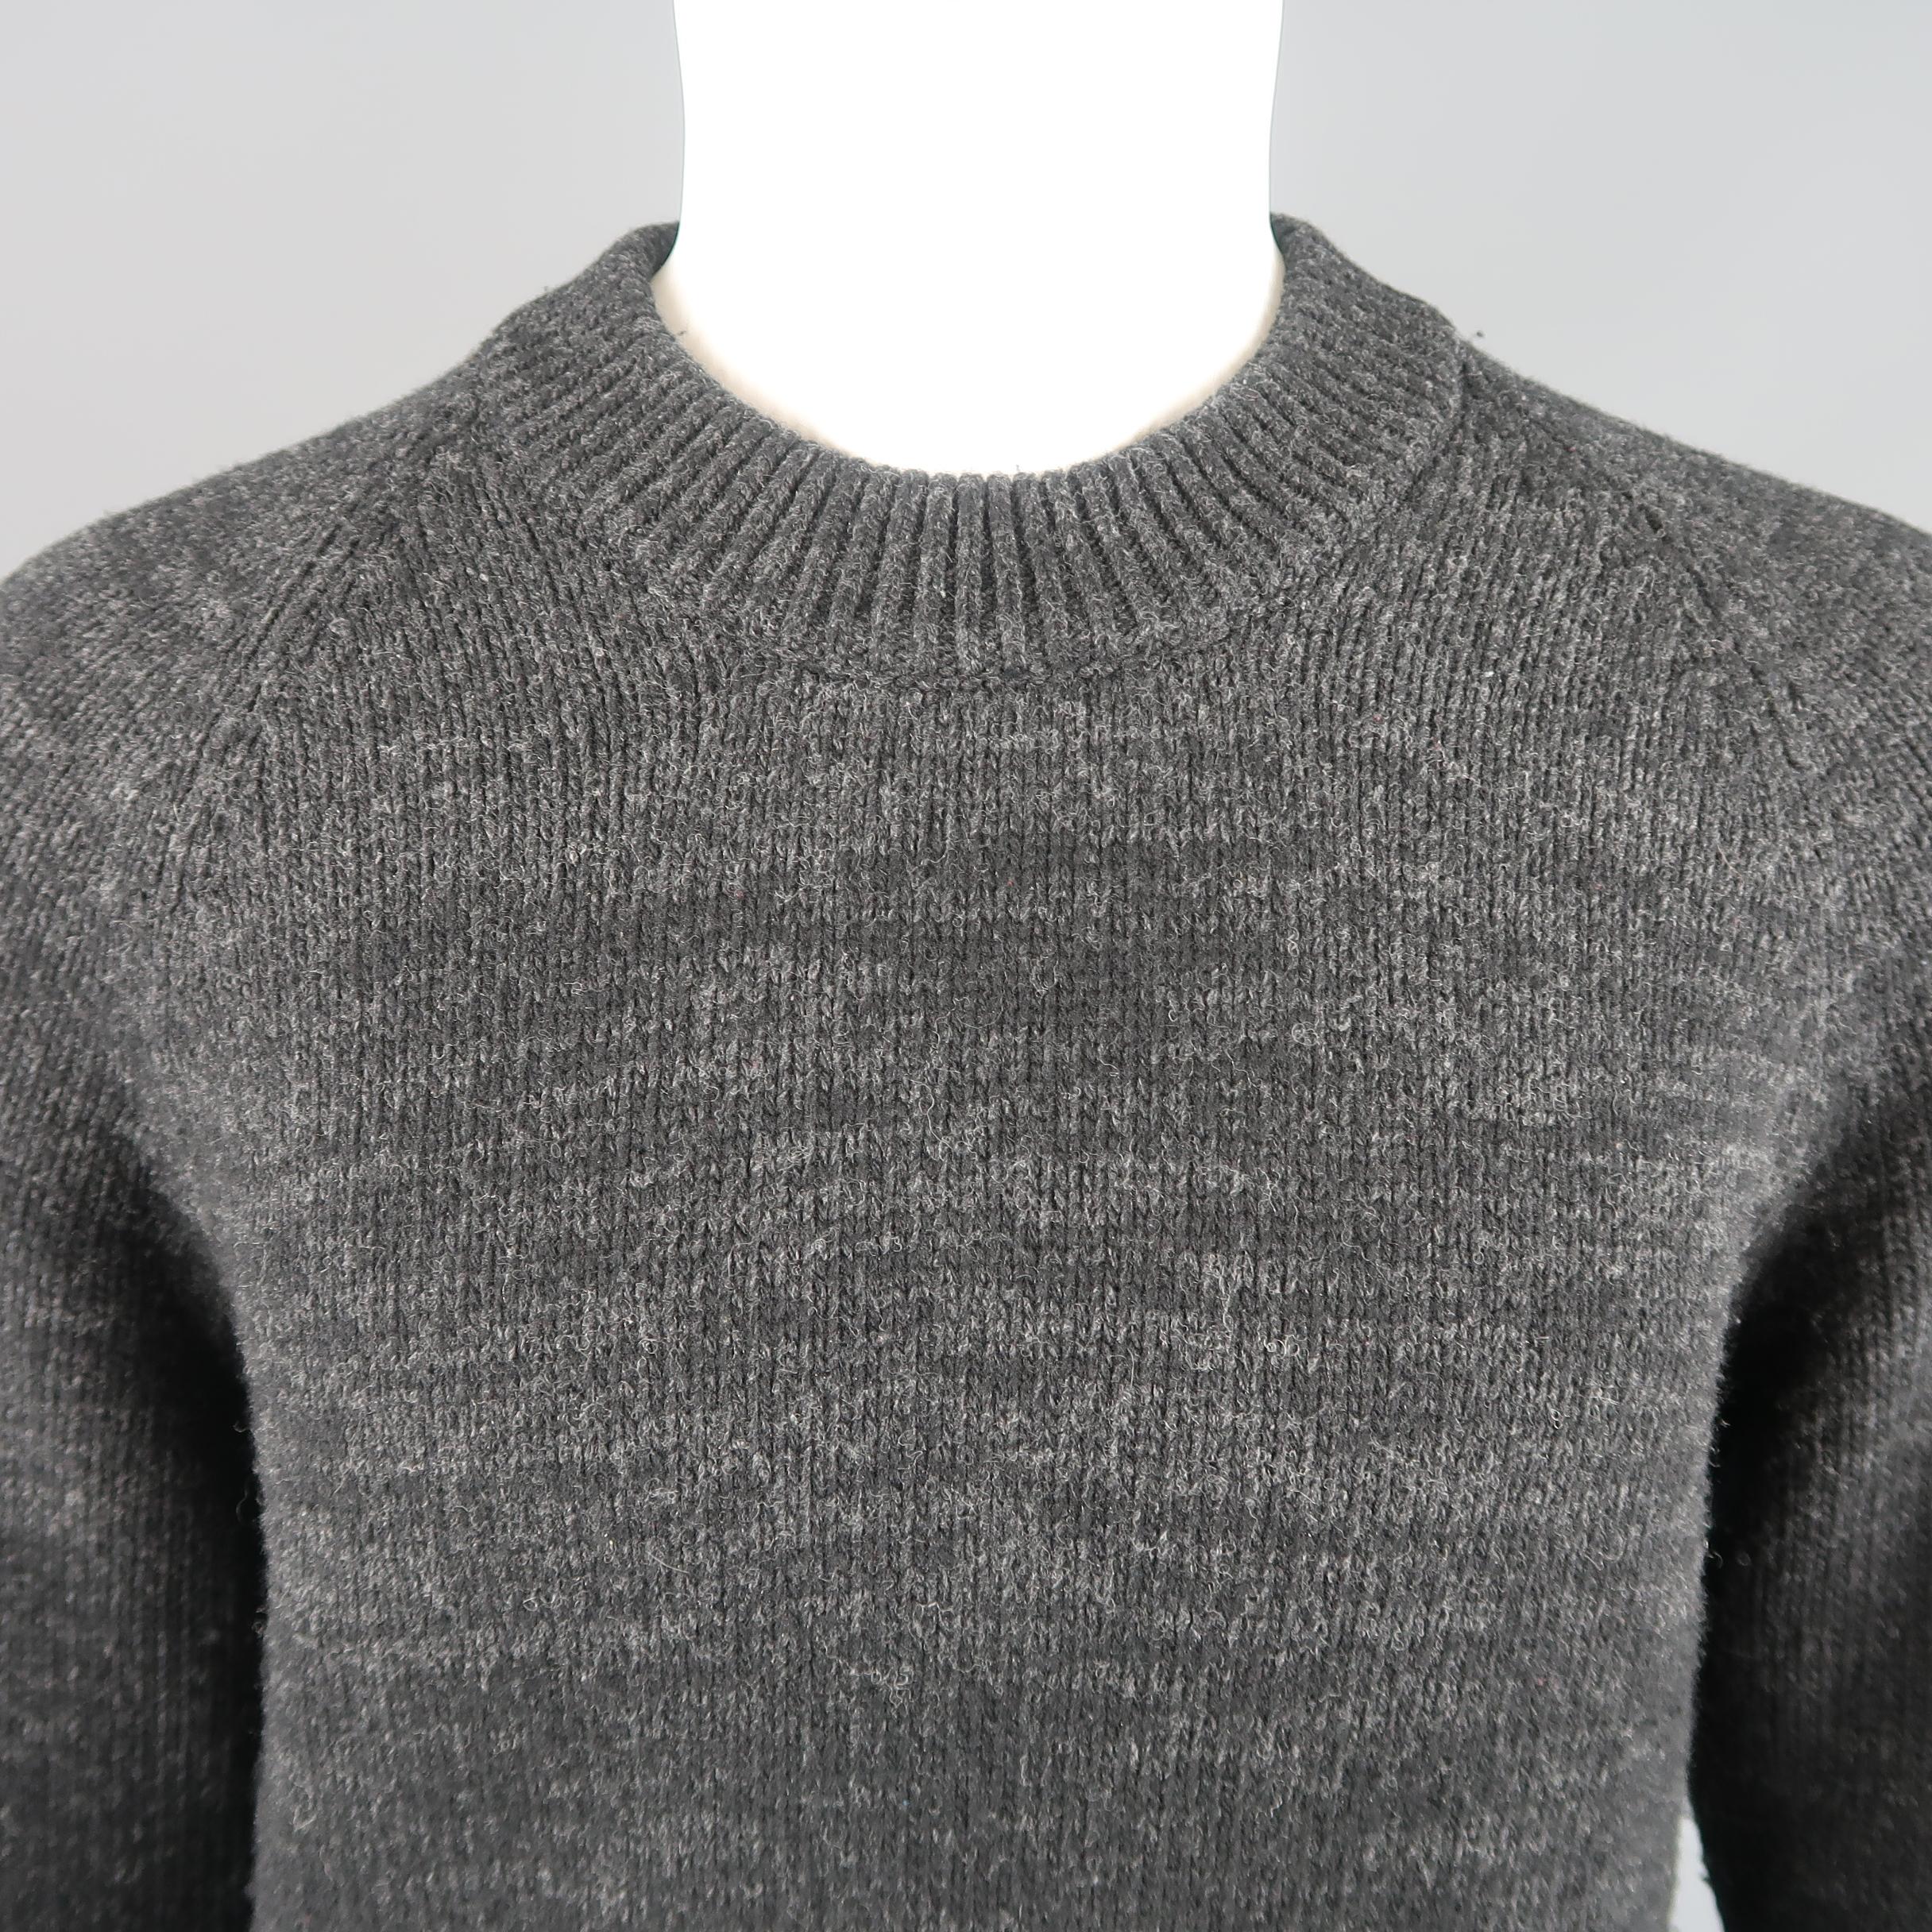 PRADA pullover sweater comes in black wool cashmere blend knit with an all over gray heathered ombre effect, ribbed crew neck, raglan sleeves, and thick ribbed waistband and cuffs. Made in Italy.
 
Excellent Pre-Owned Condition.
Marked: IT 50
